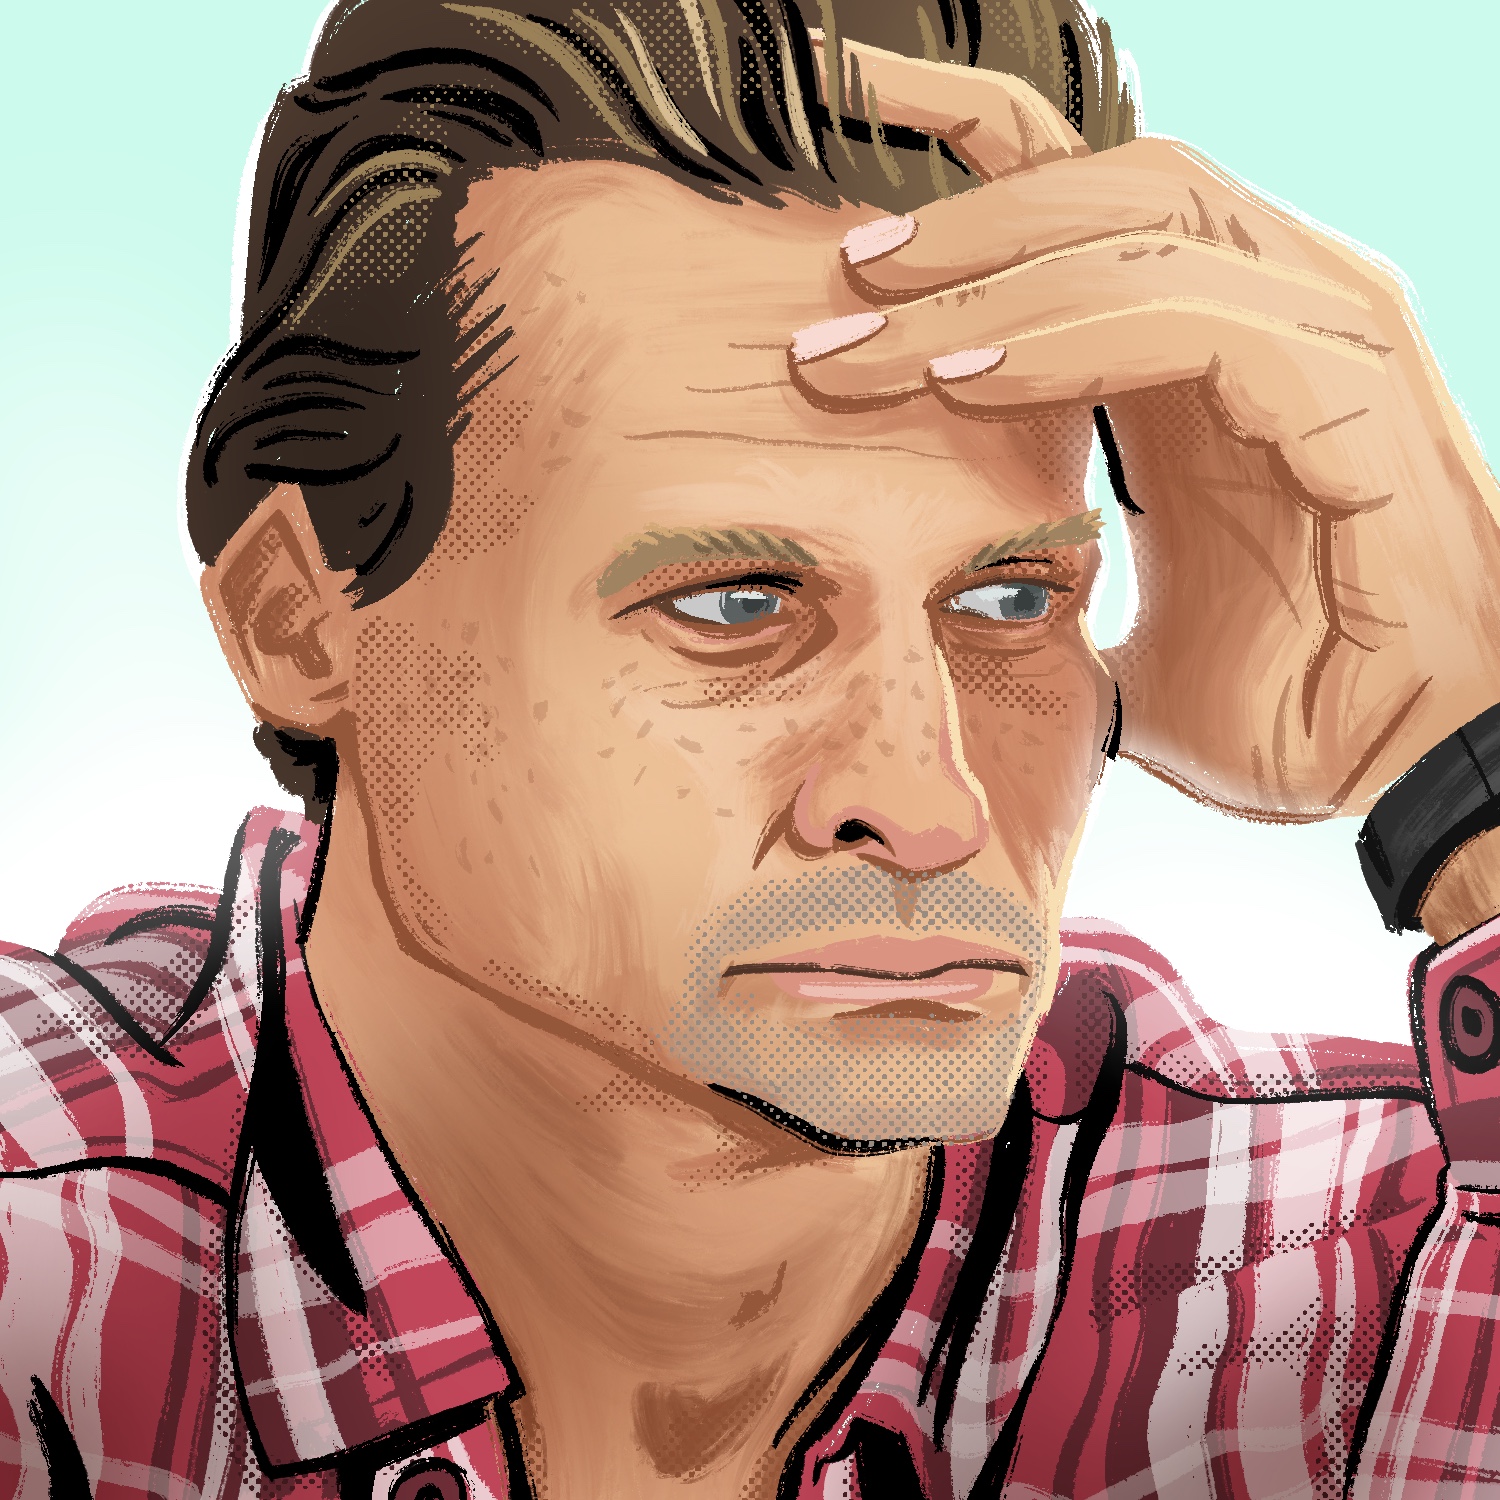 An illustration of a man looking to the right, with his hand on his head. He looks tired, and possibly deep in thought. He has a light complexion, blue eyes, and dark sandy hair that fades lighter towards the top. His hair is slicked back, and one of his fingers is stuck into it. The man is wearing a red plaid shirt and his shoulder are high, as if he is sitting and hunched over slightly. The background is a very bright sky blue that fades to white towards the bottom.